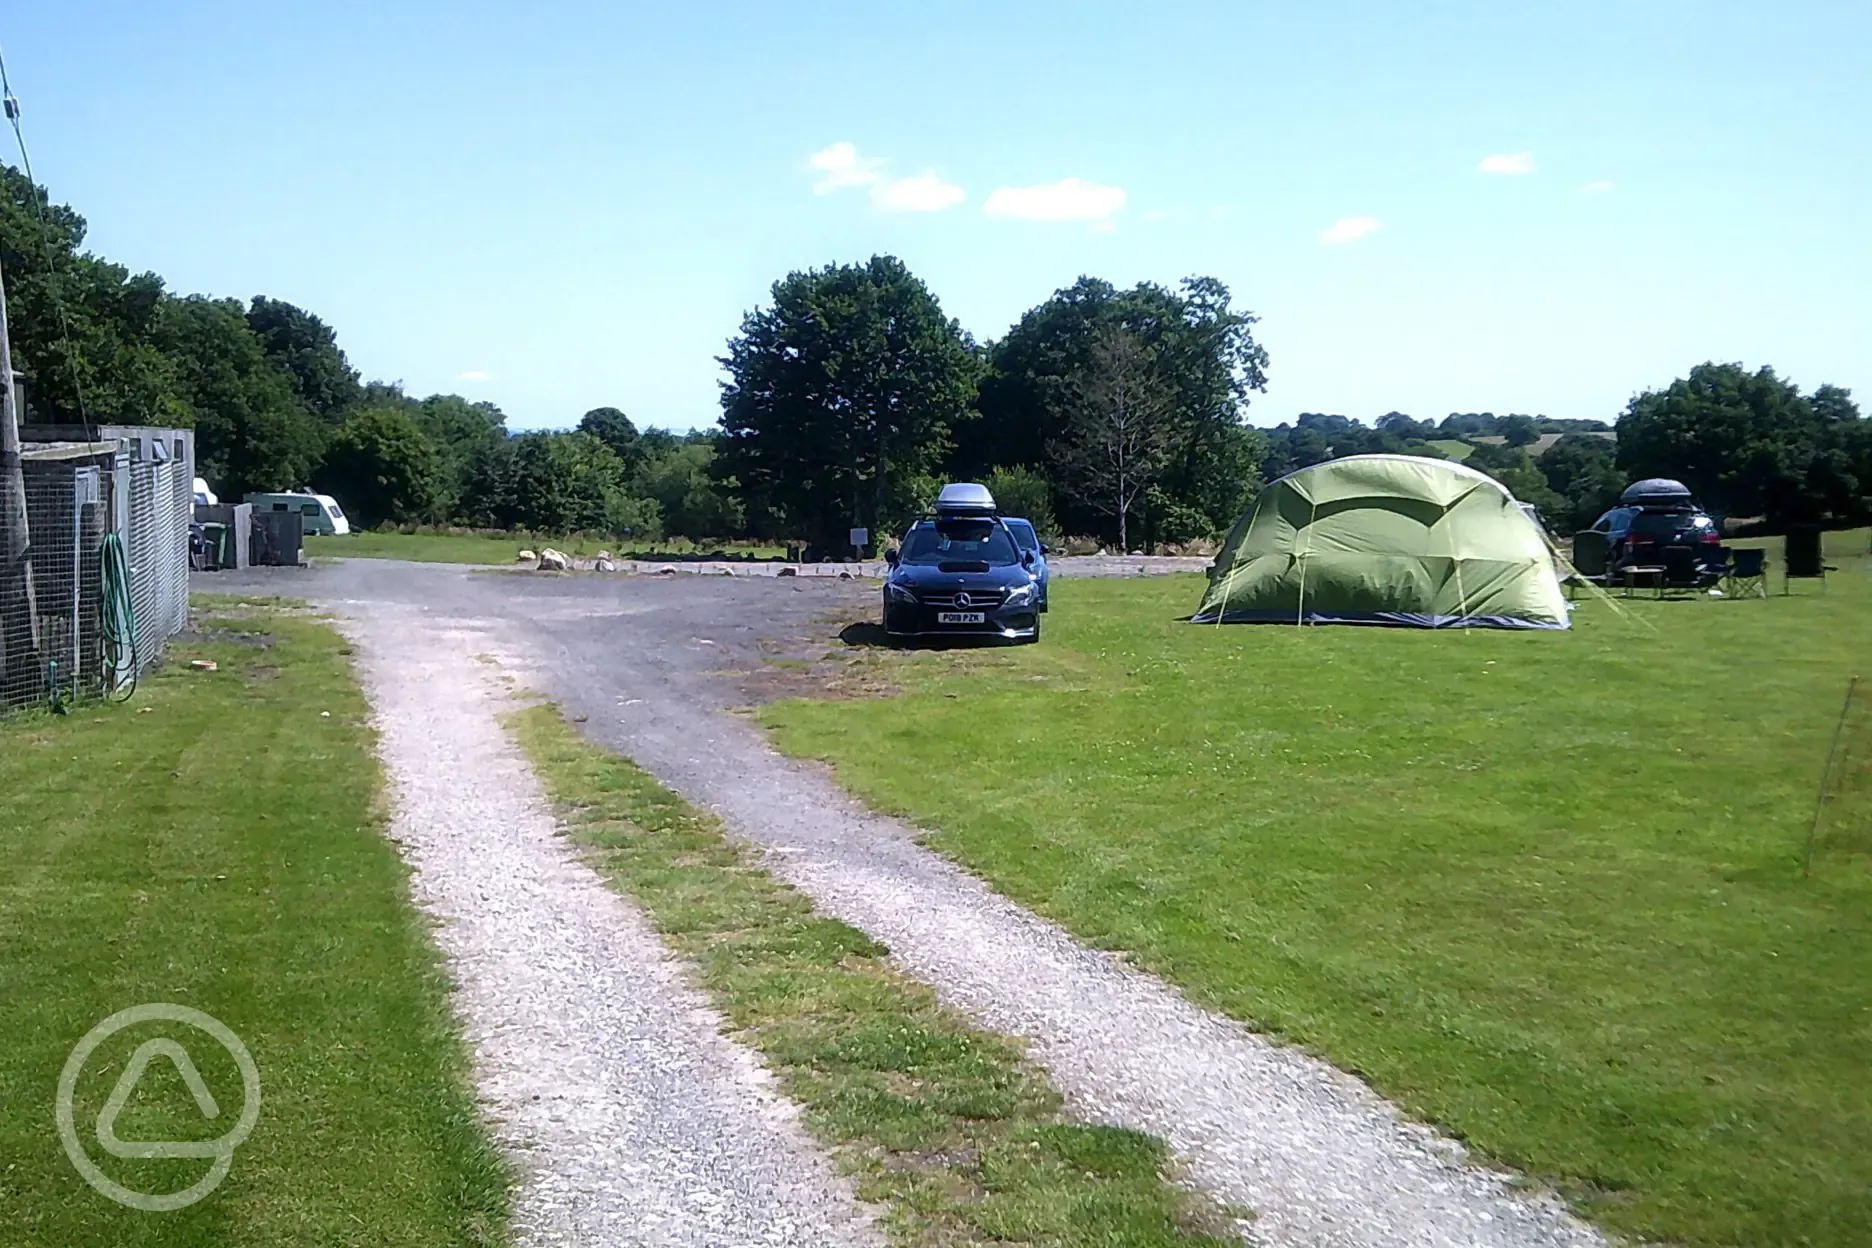 drive down to the campsite